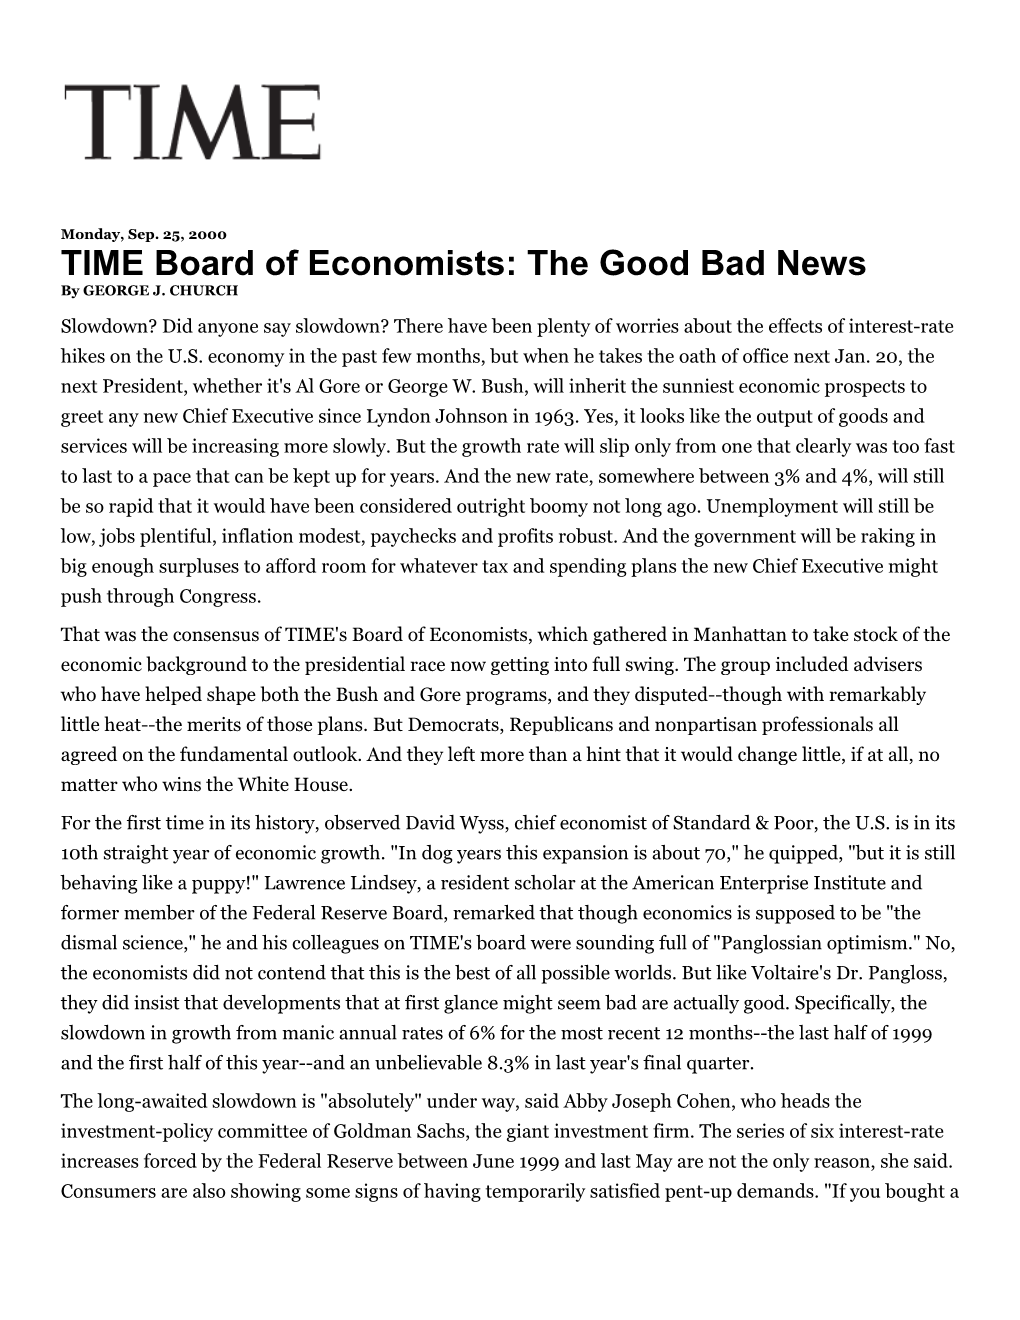 TIME Board of Economists: the Good Bad News